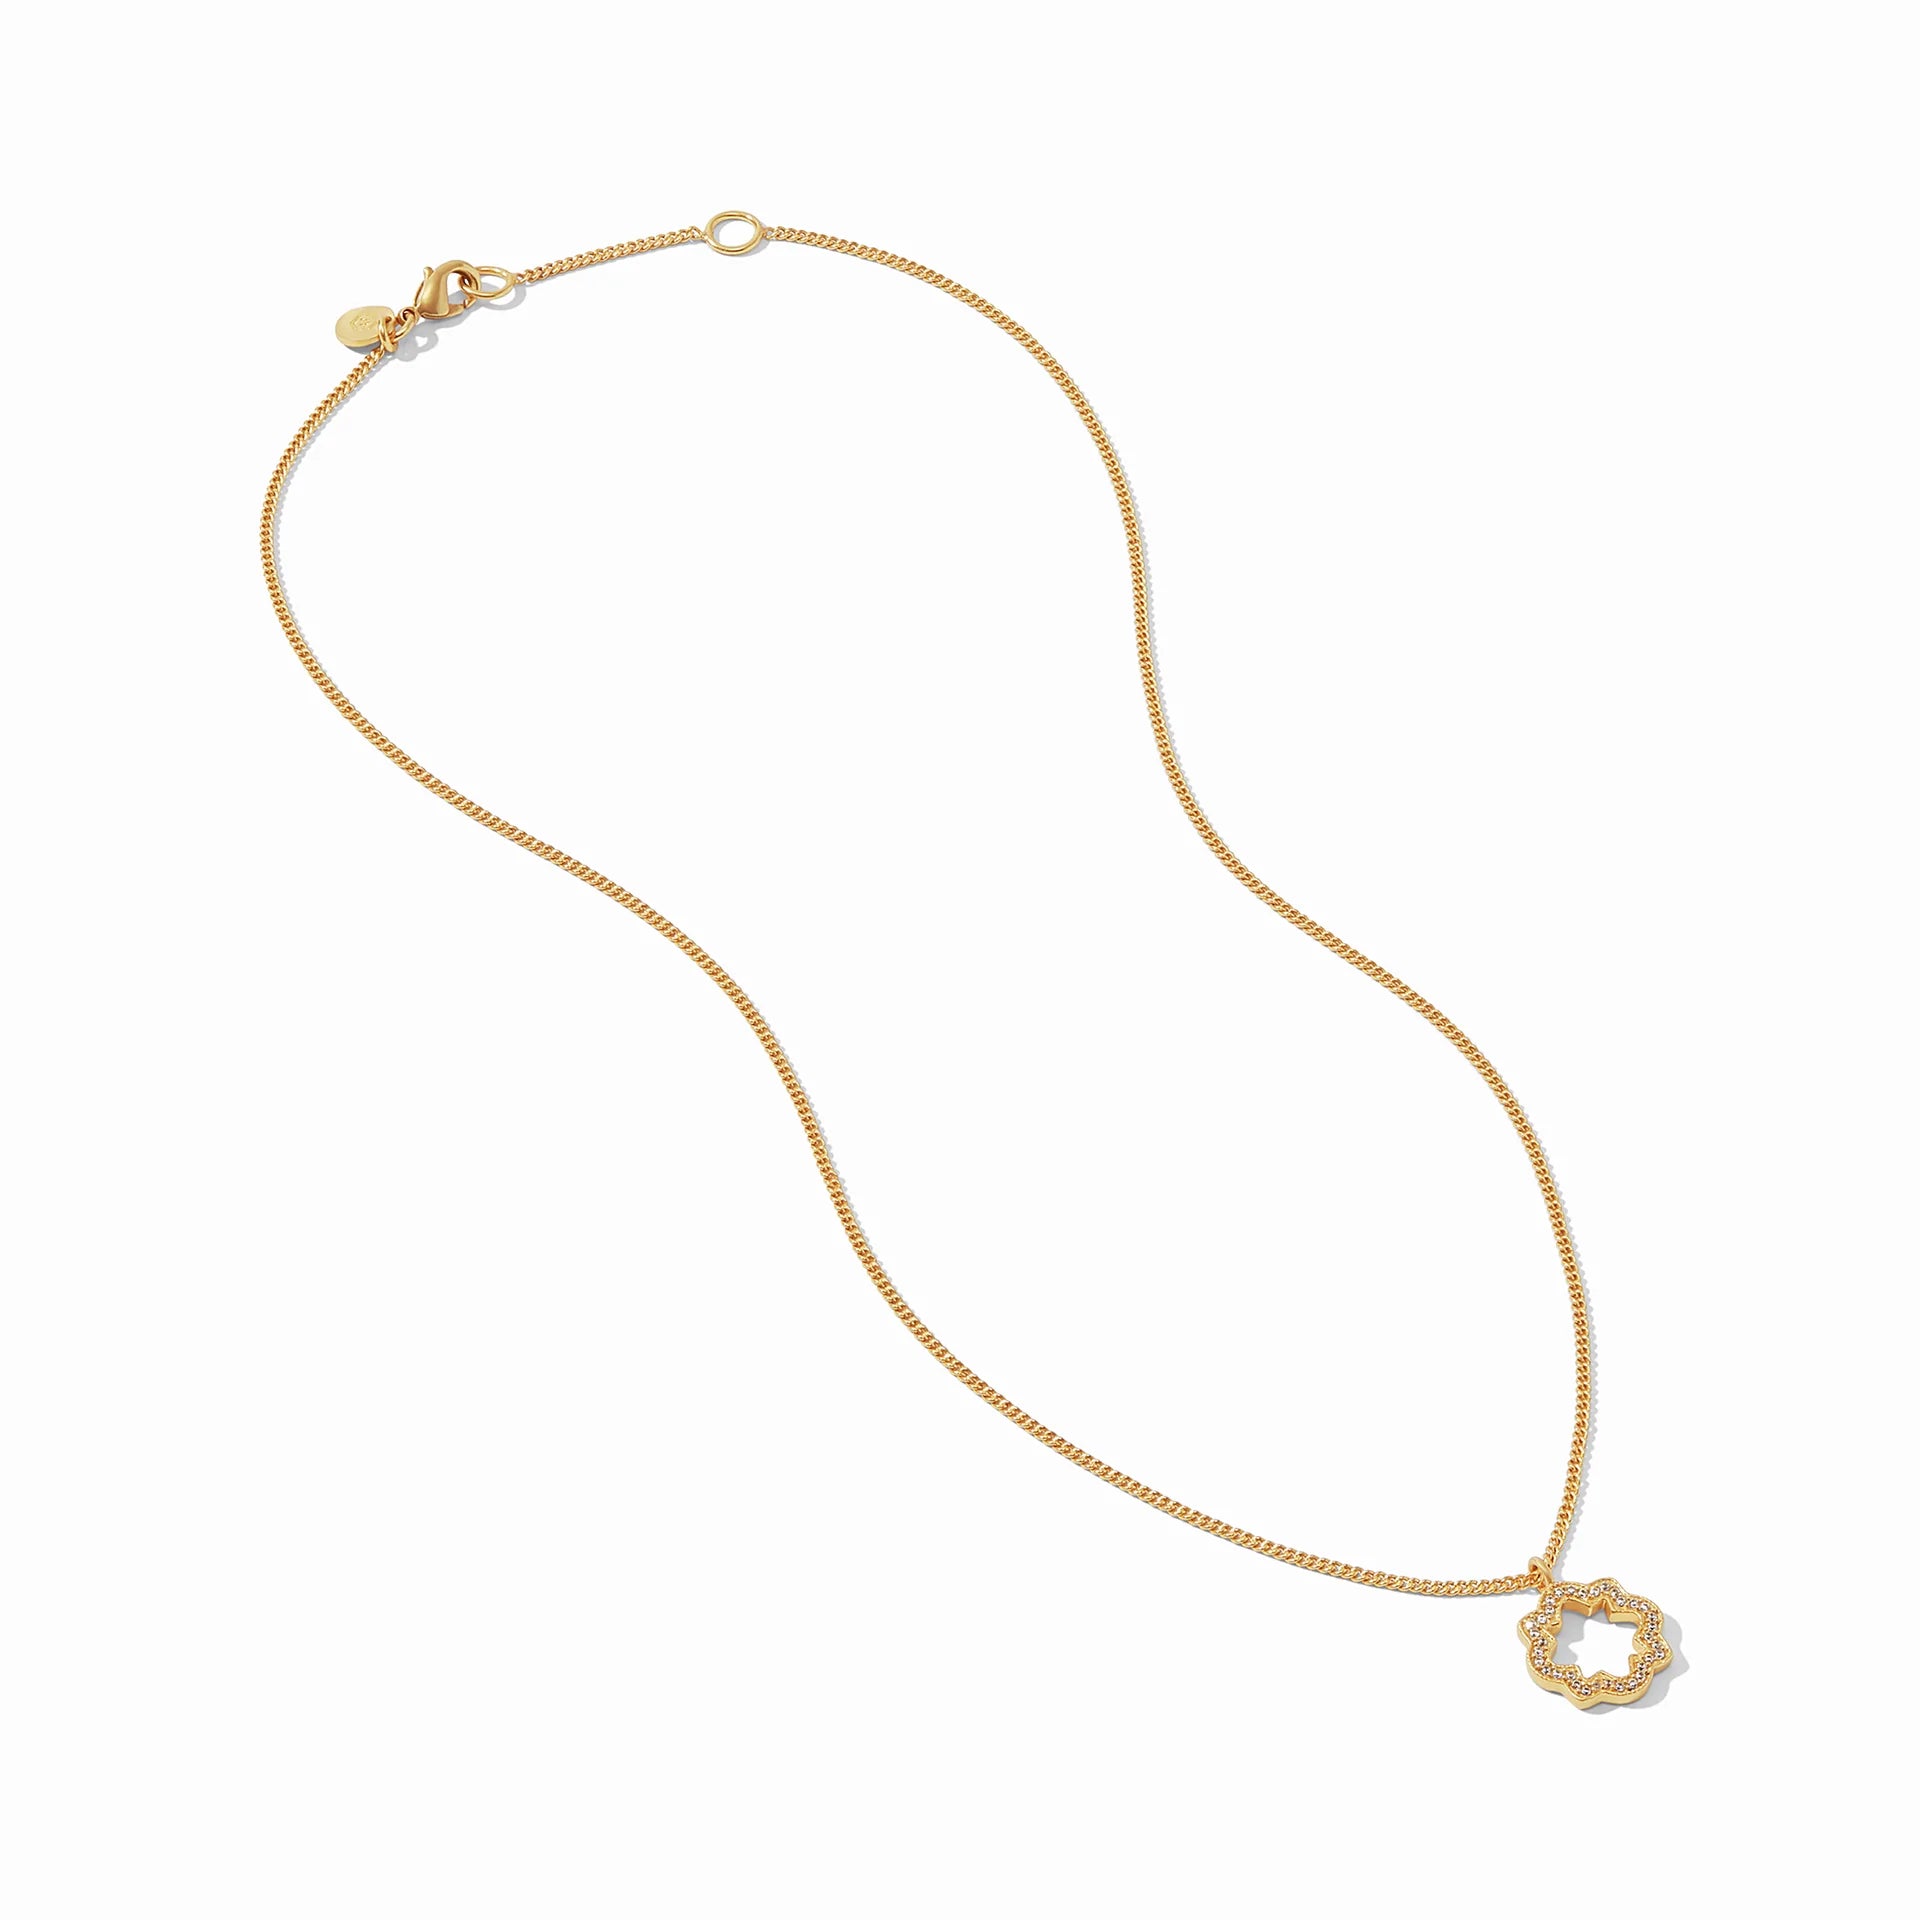 Odette Solitaire Necklace by Julie Vos. Pavé classic quatrefoil shape with a bit of negative center space. 24K gold plate, cubic zirconia, measures 16.5-17.5 inch adjustable length. Charm measures 0.7 inch length. Shop at The Painted Cottage in Edgewater, MD